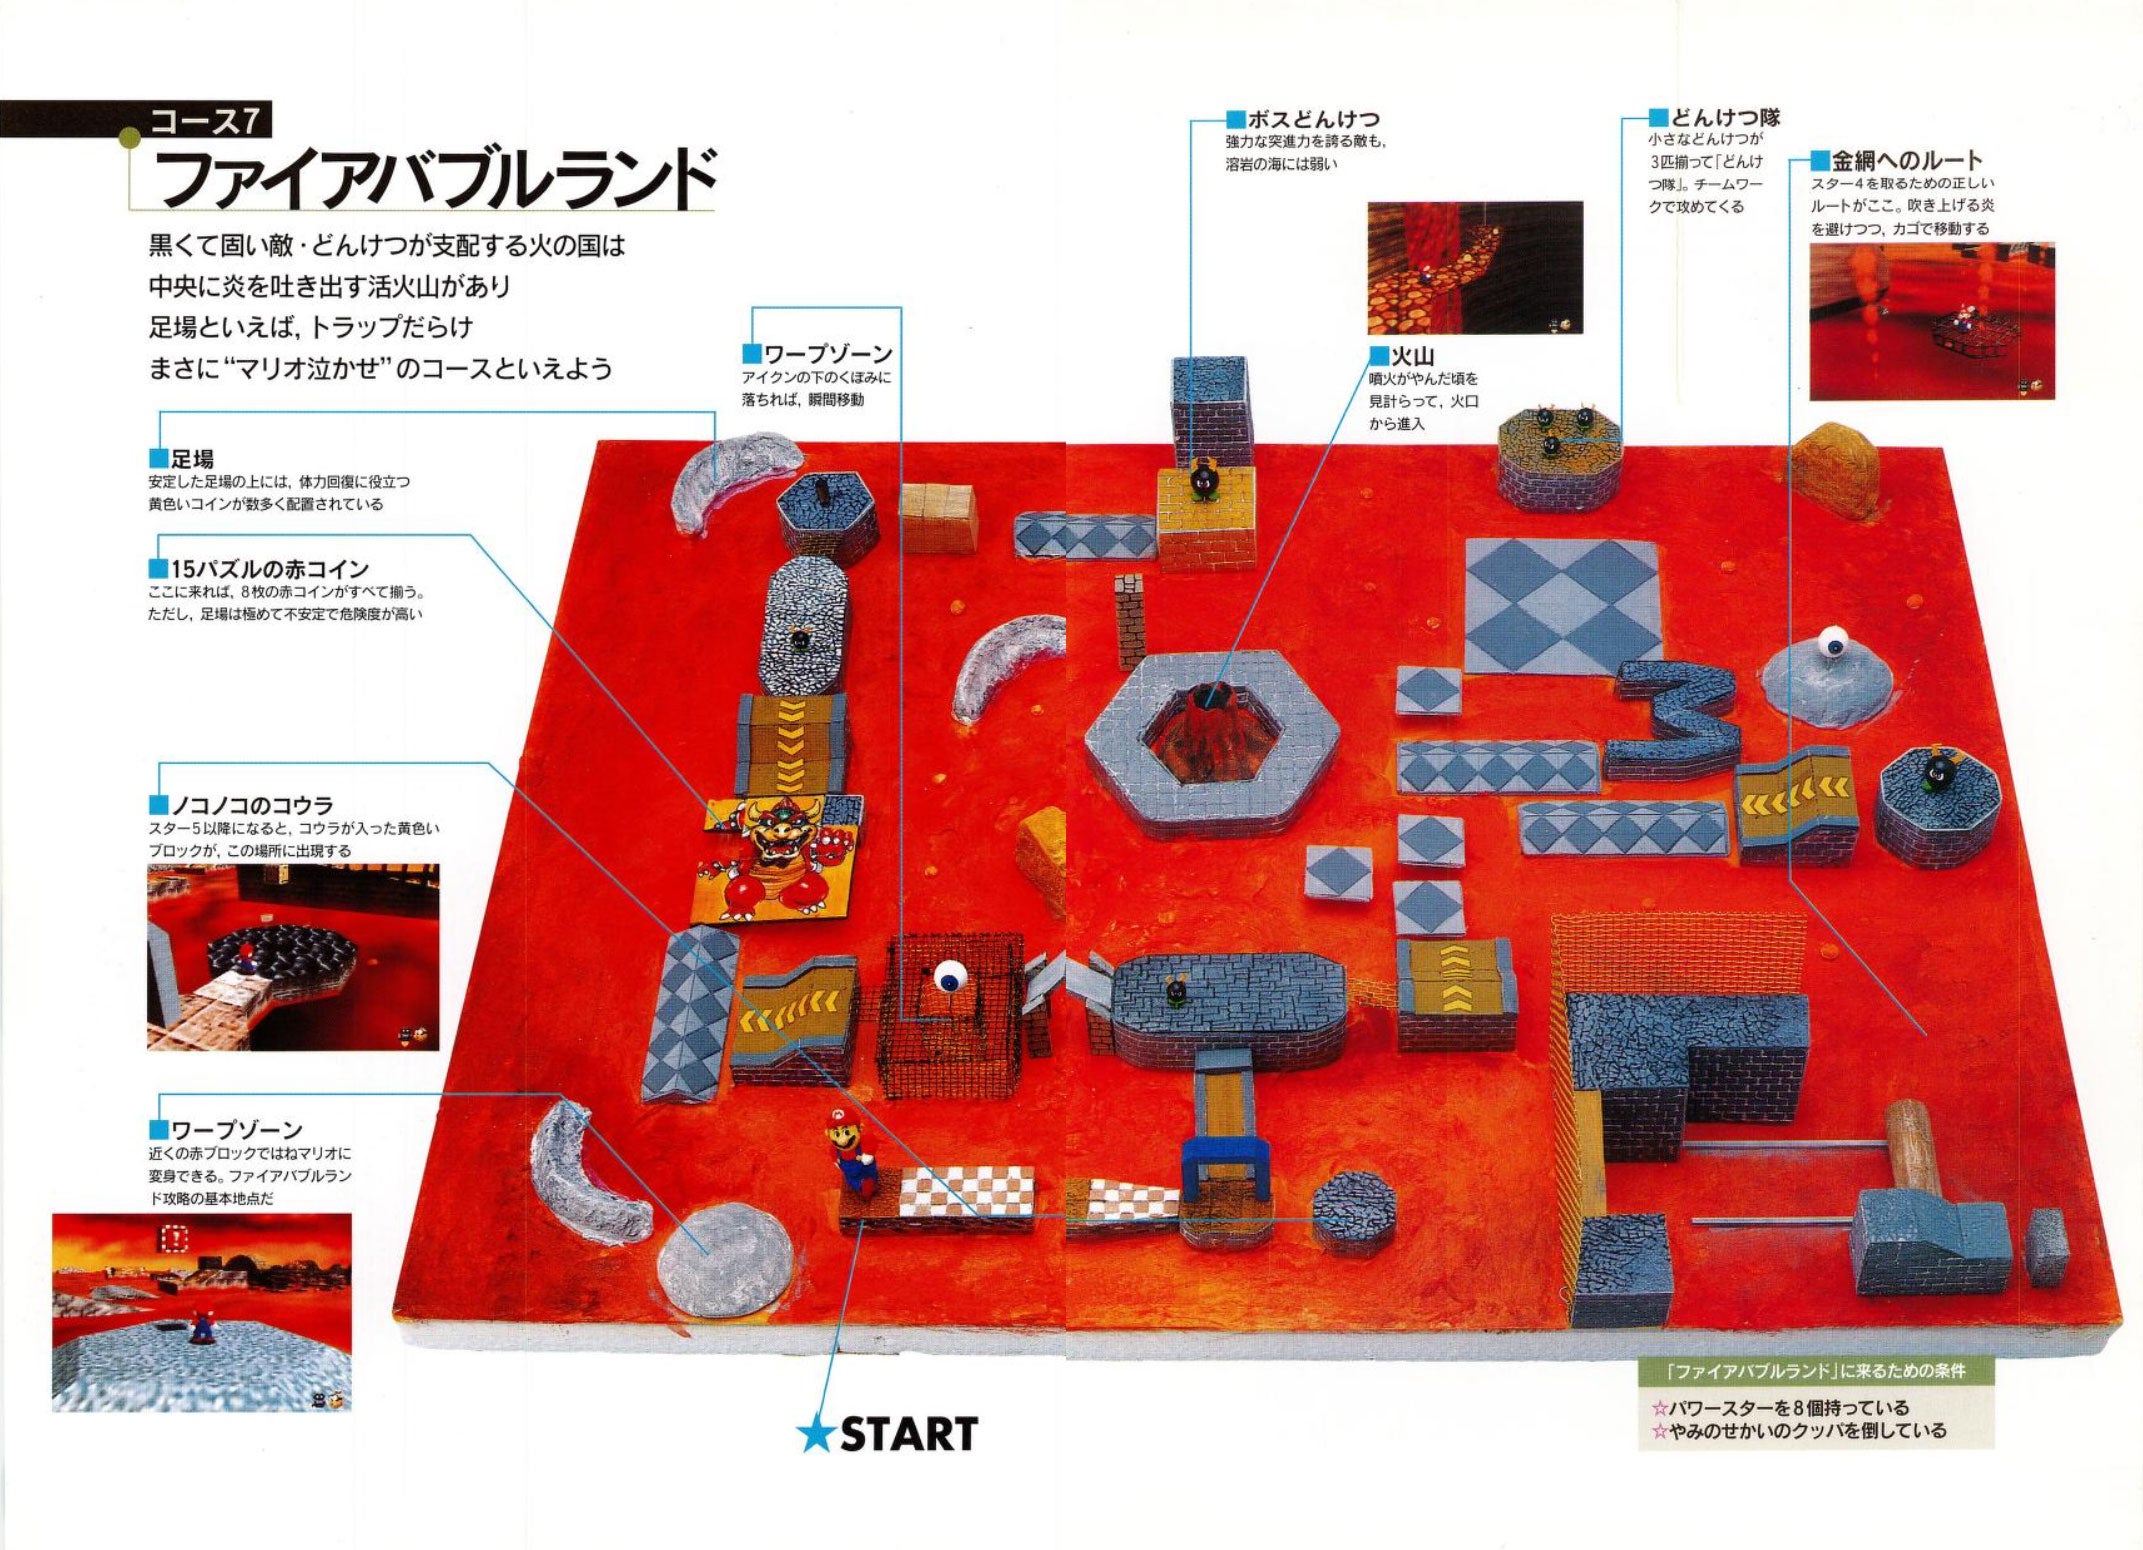 Incredible 90s Super Mario 64 Guide Scanned In HD, Can Now Be Enjoyed By All